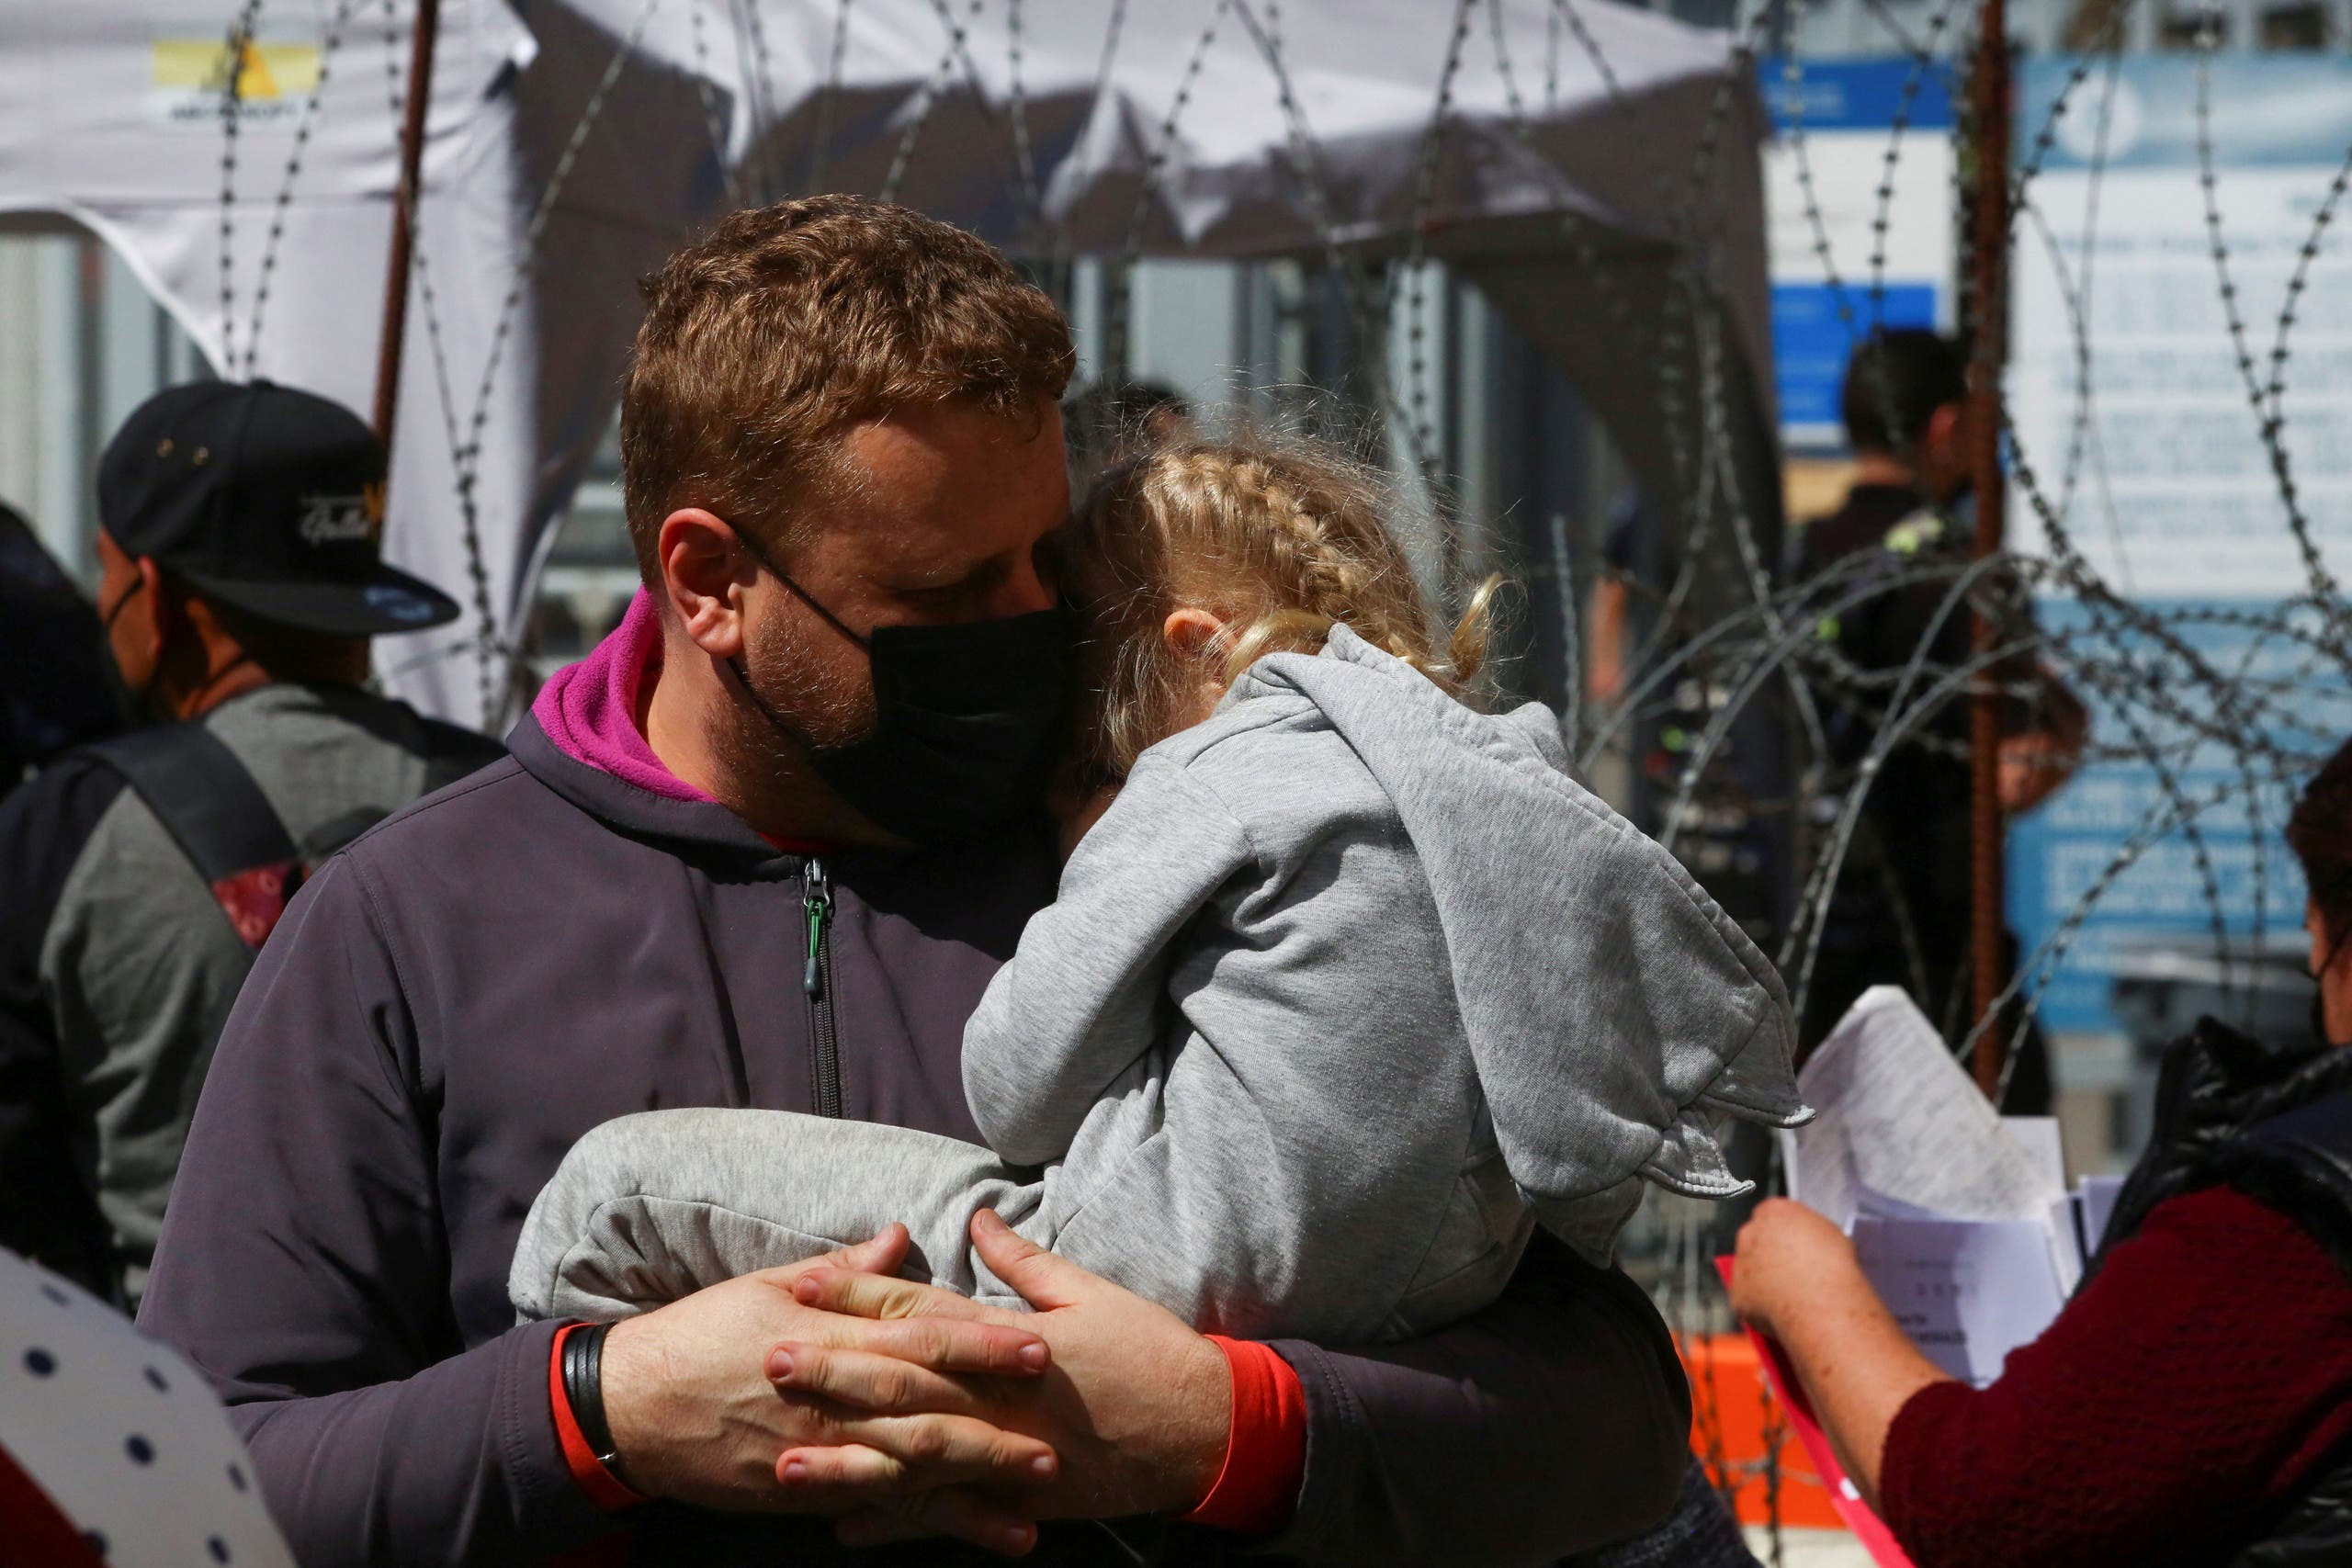 A Ukrainian man embraces his daughter while waiting with his family for a humanitarian visa outside the San Ysidro Port of Entry of the U.S.-Mexico border in Tijuana, Mexico March 11, 2022. (Reuters)